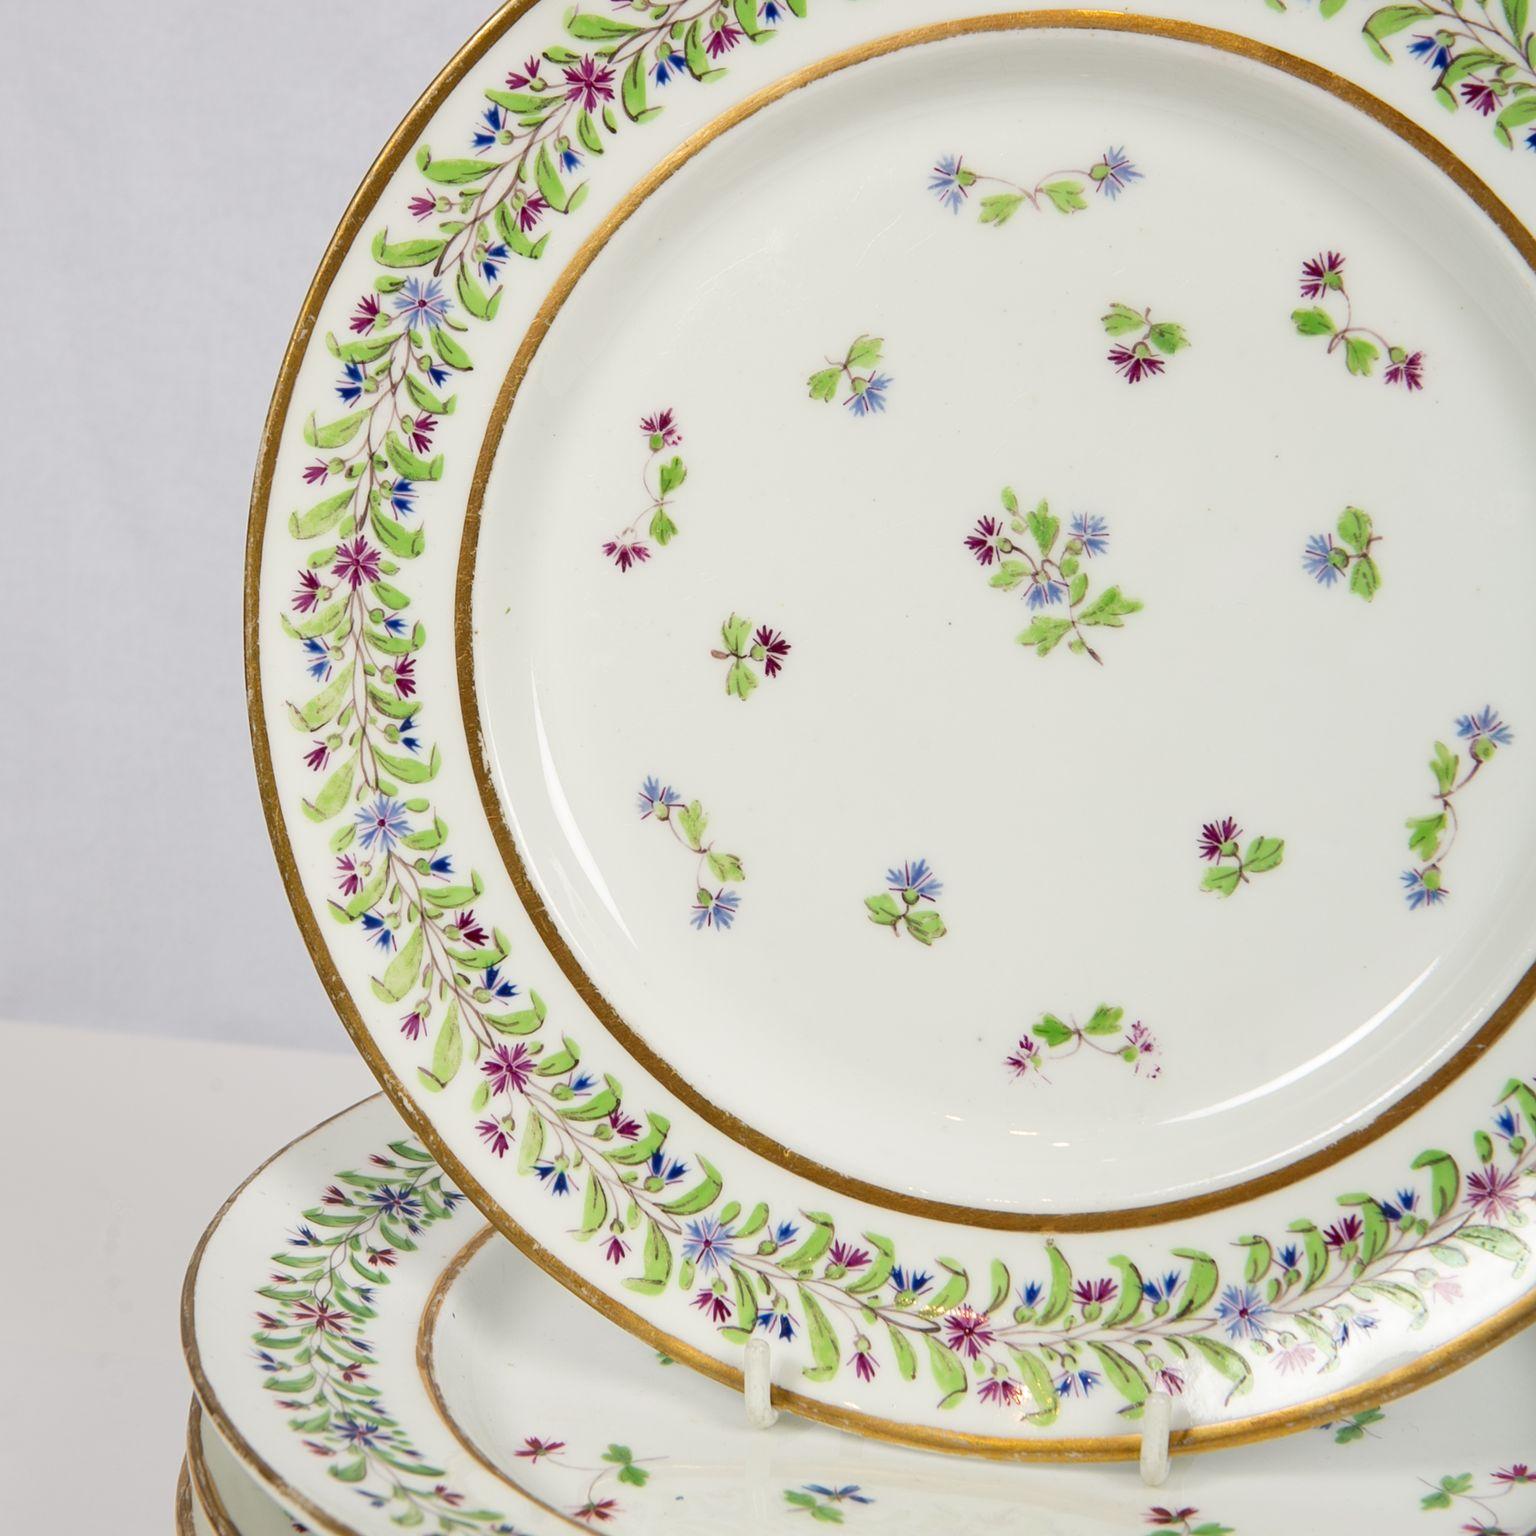 We are pleased to offer this set of twelve lovely antique porcelain dishes decorated in the 